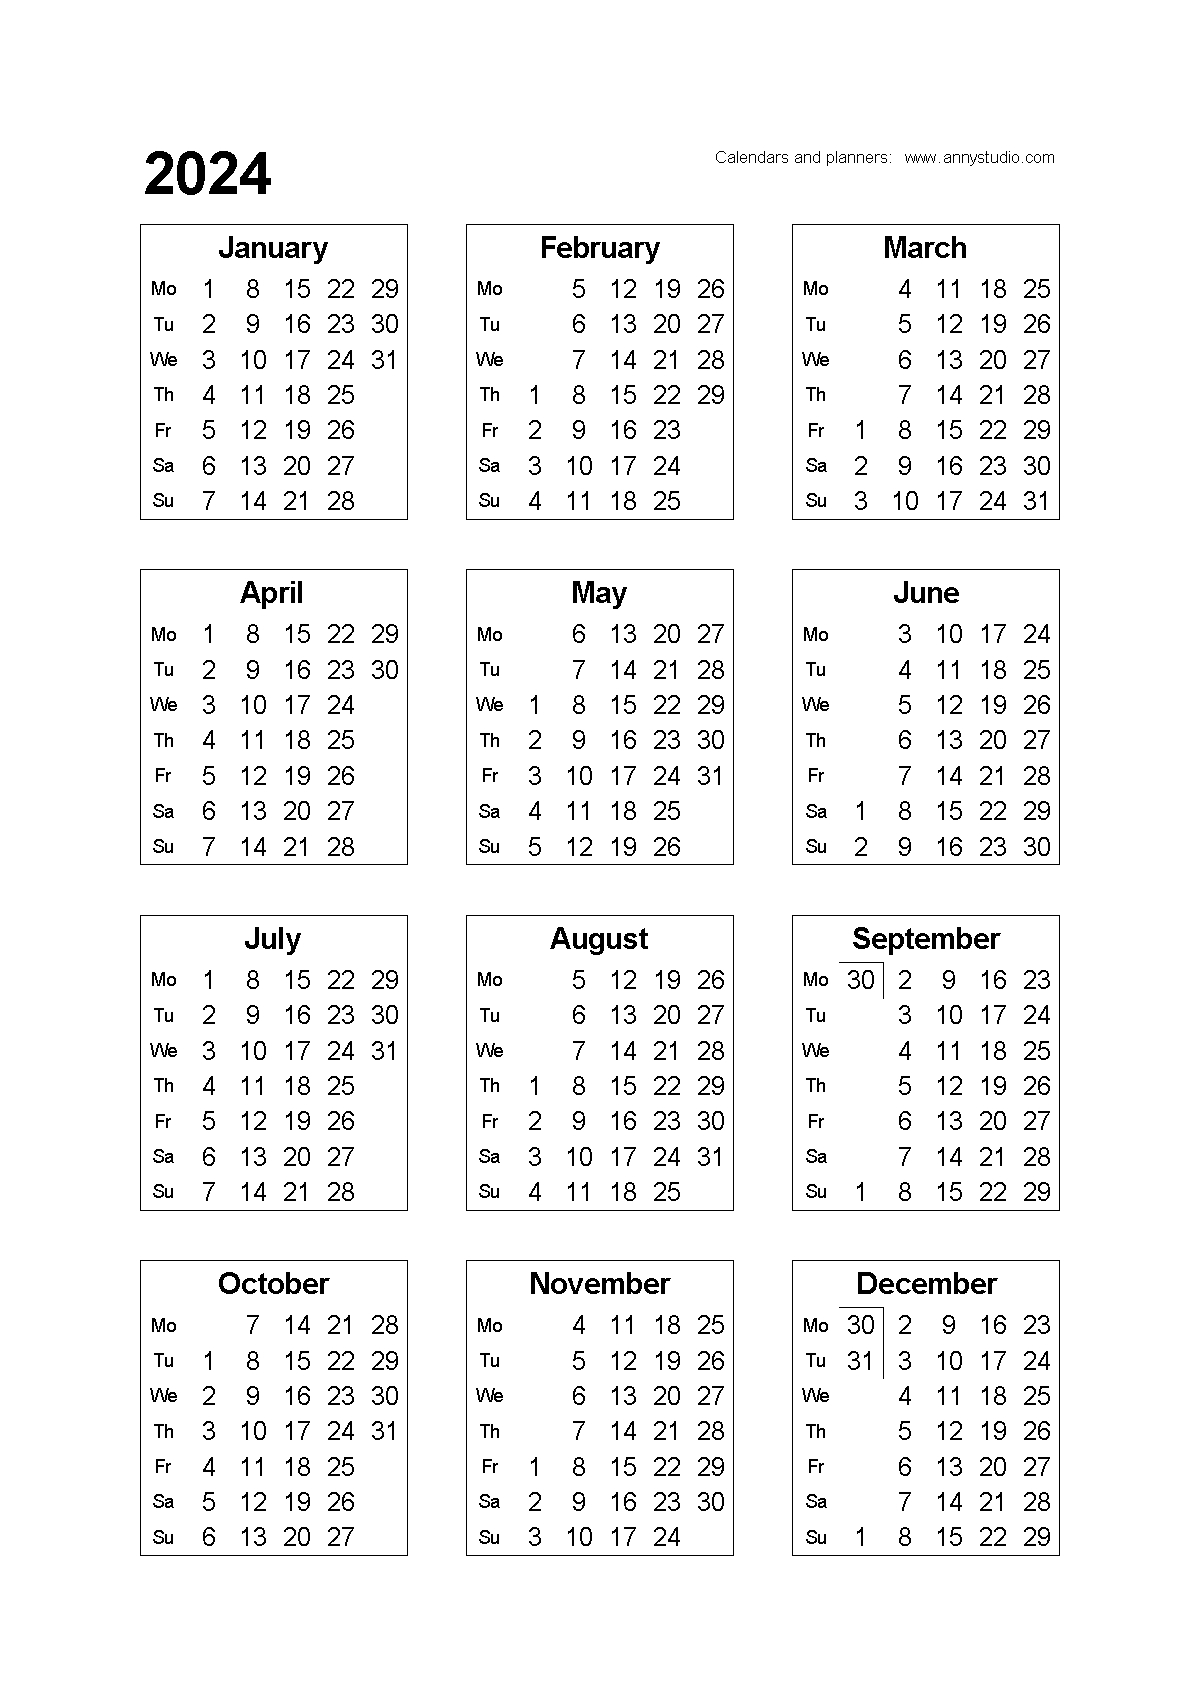 Free Printable Calendars And Planners 2024, 2025 And 2026 | Printable Calendar 2024 Calendarlabs